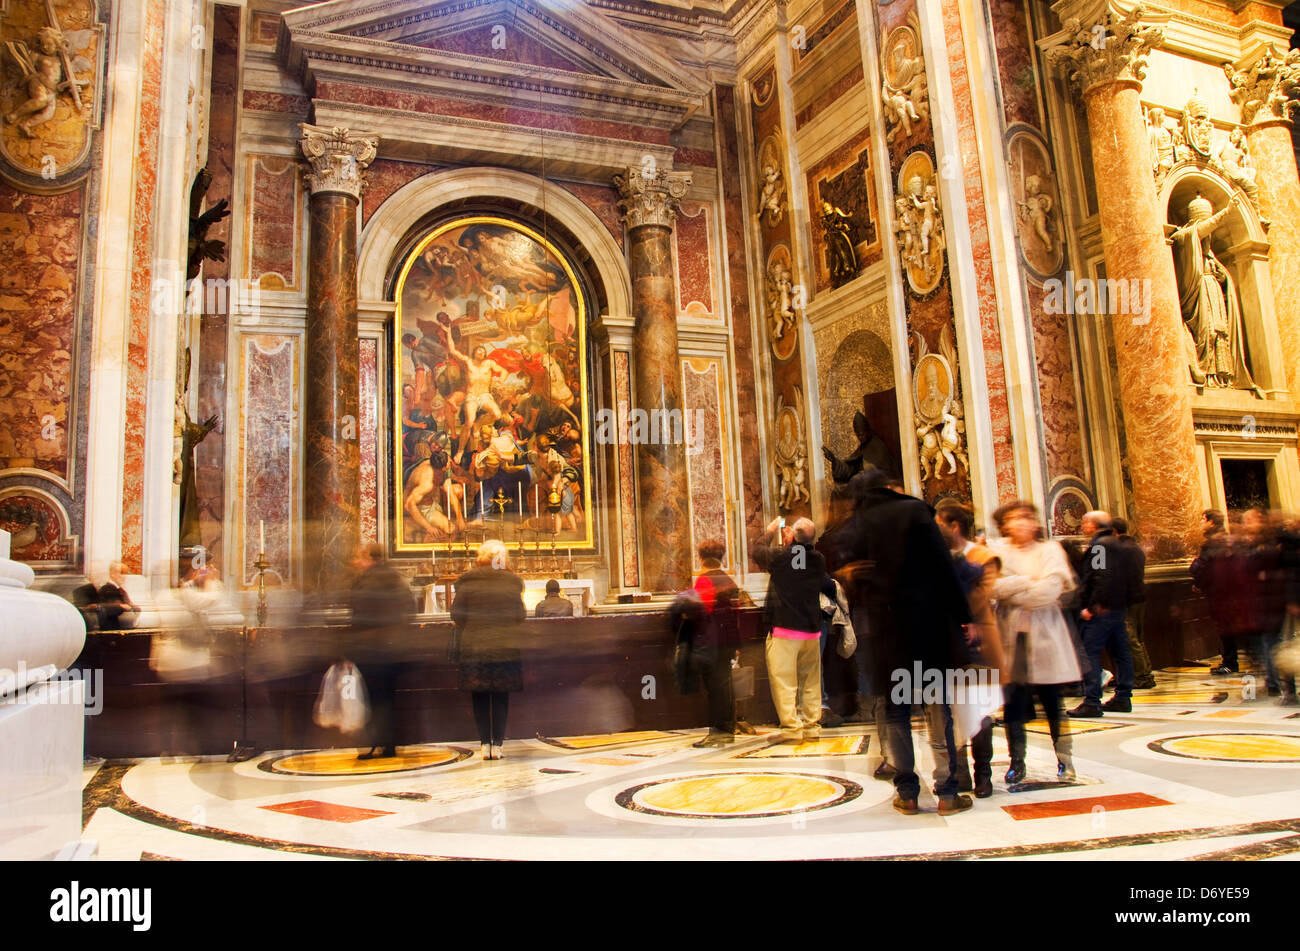 Tourists contemplate an ornate altar within the St. Peter's Basilica, Vatican City Stock Photo